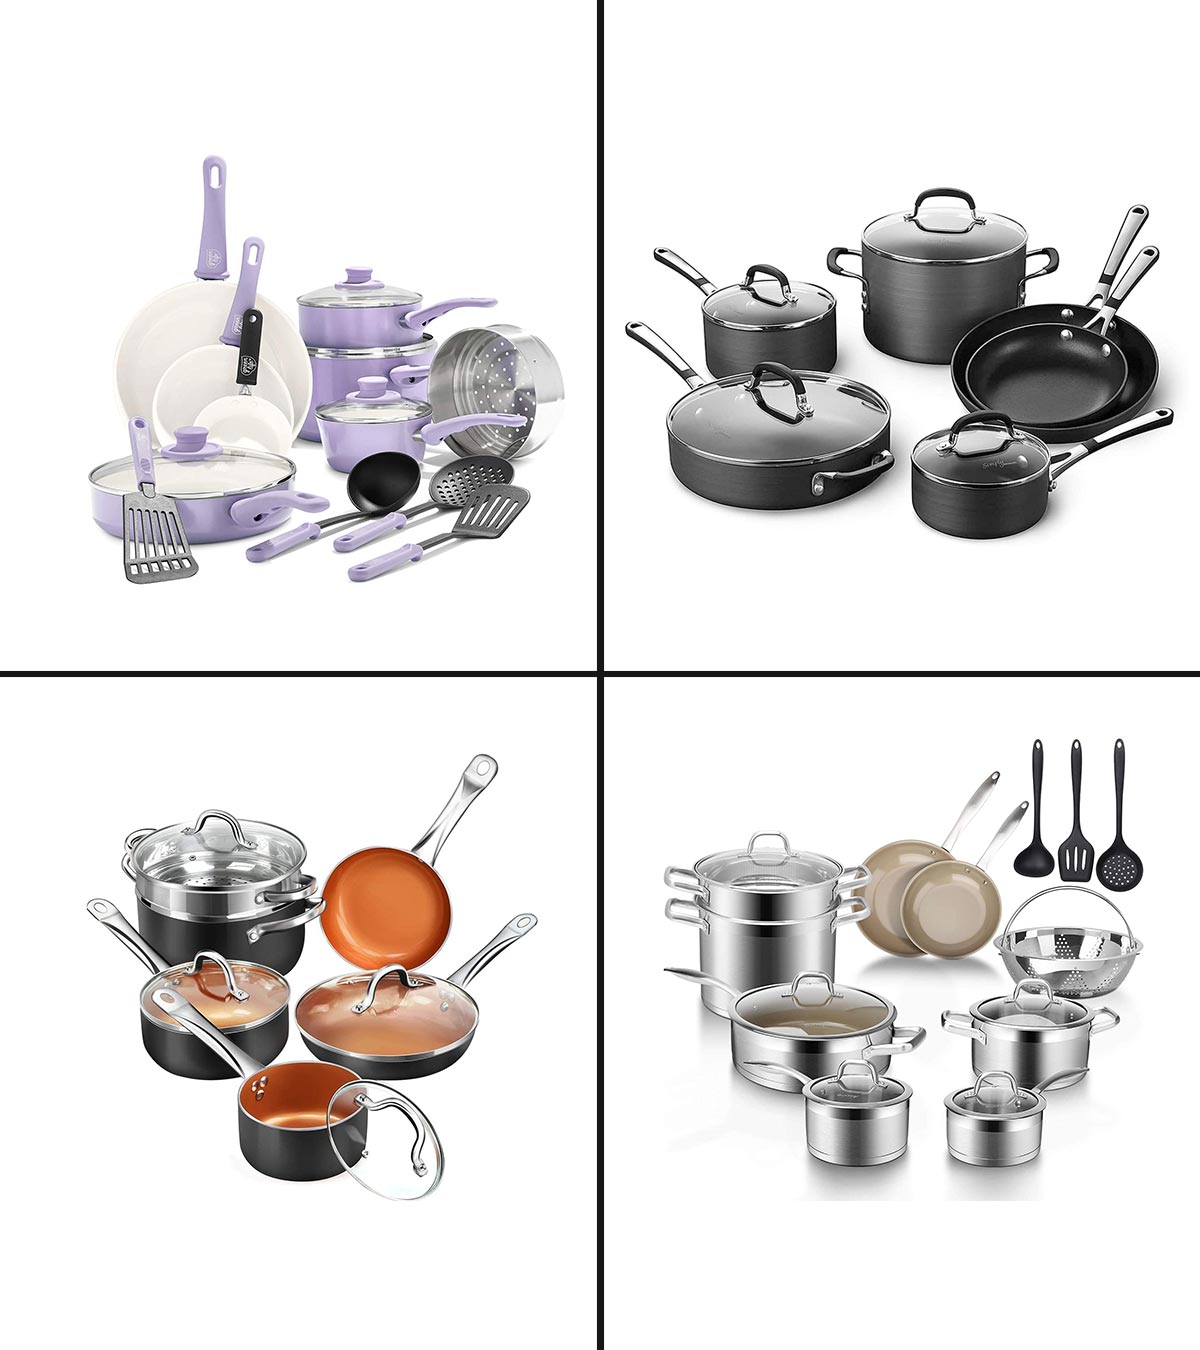 https://www.momjunction.com/wp-content/uploads/2021/03/11-Best-Cookware-For-Glass-Top-Stove-In-2021.jpg